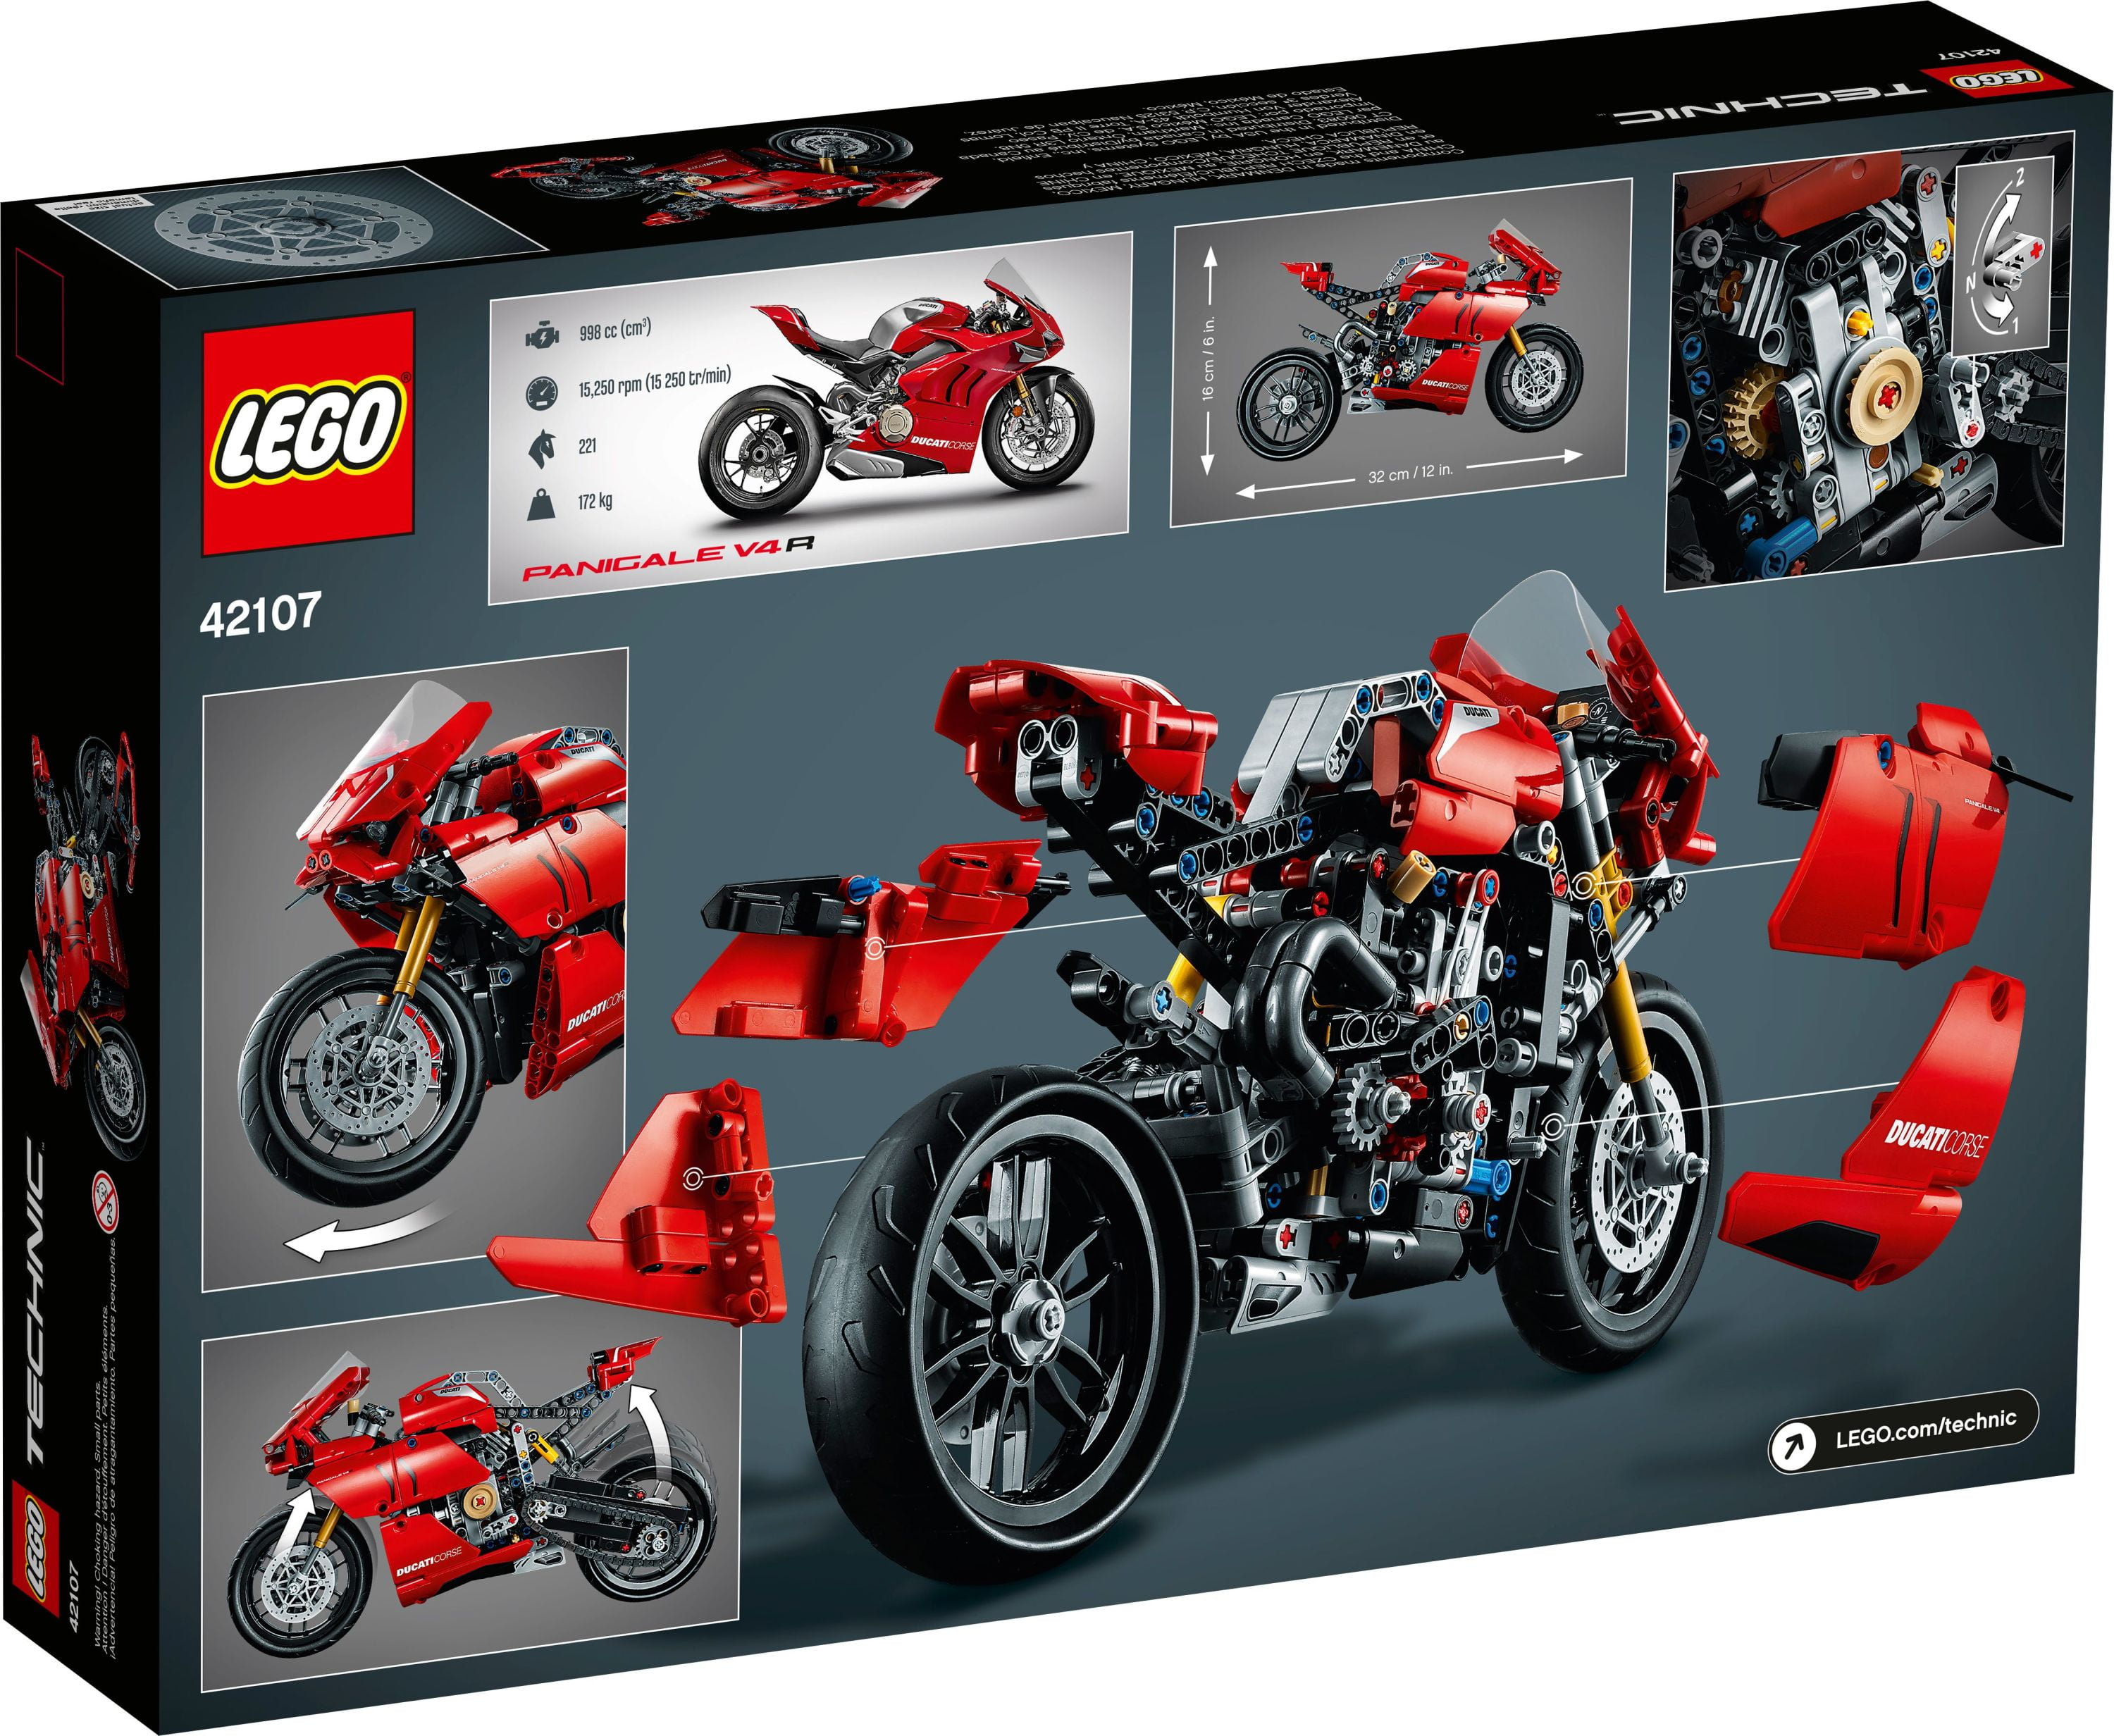 LEGO Technic Ducati Panigale V4 R Motorcycle 42107 Building Set -  Collectible Superbike Display Model Kit with Gearbox and Working  Suspension, Fun for Adults and Motorcycle Enthusiasts 